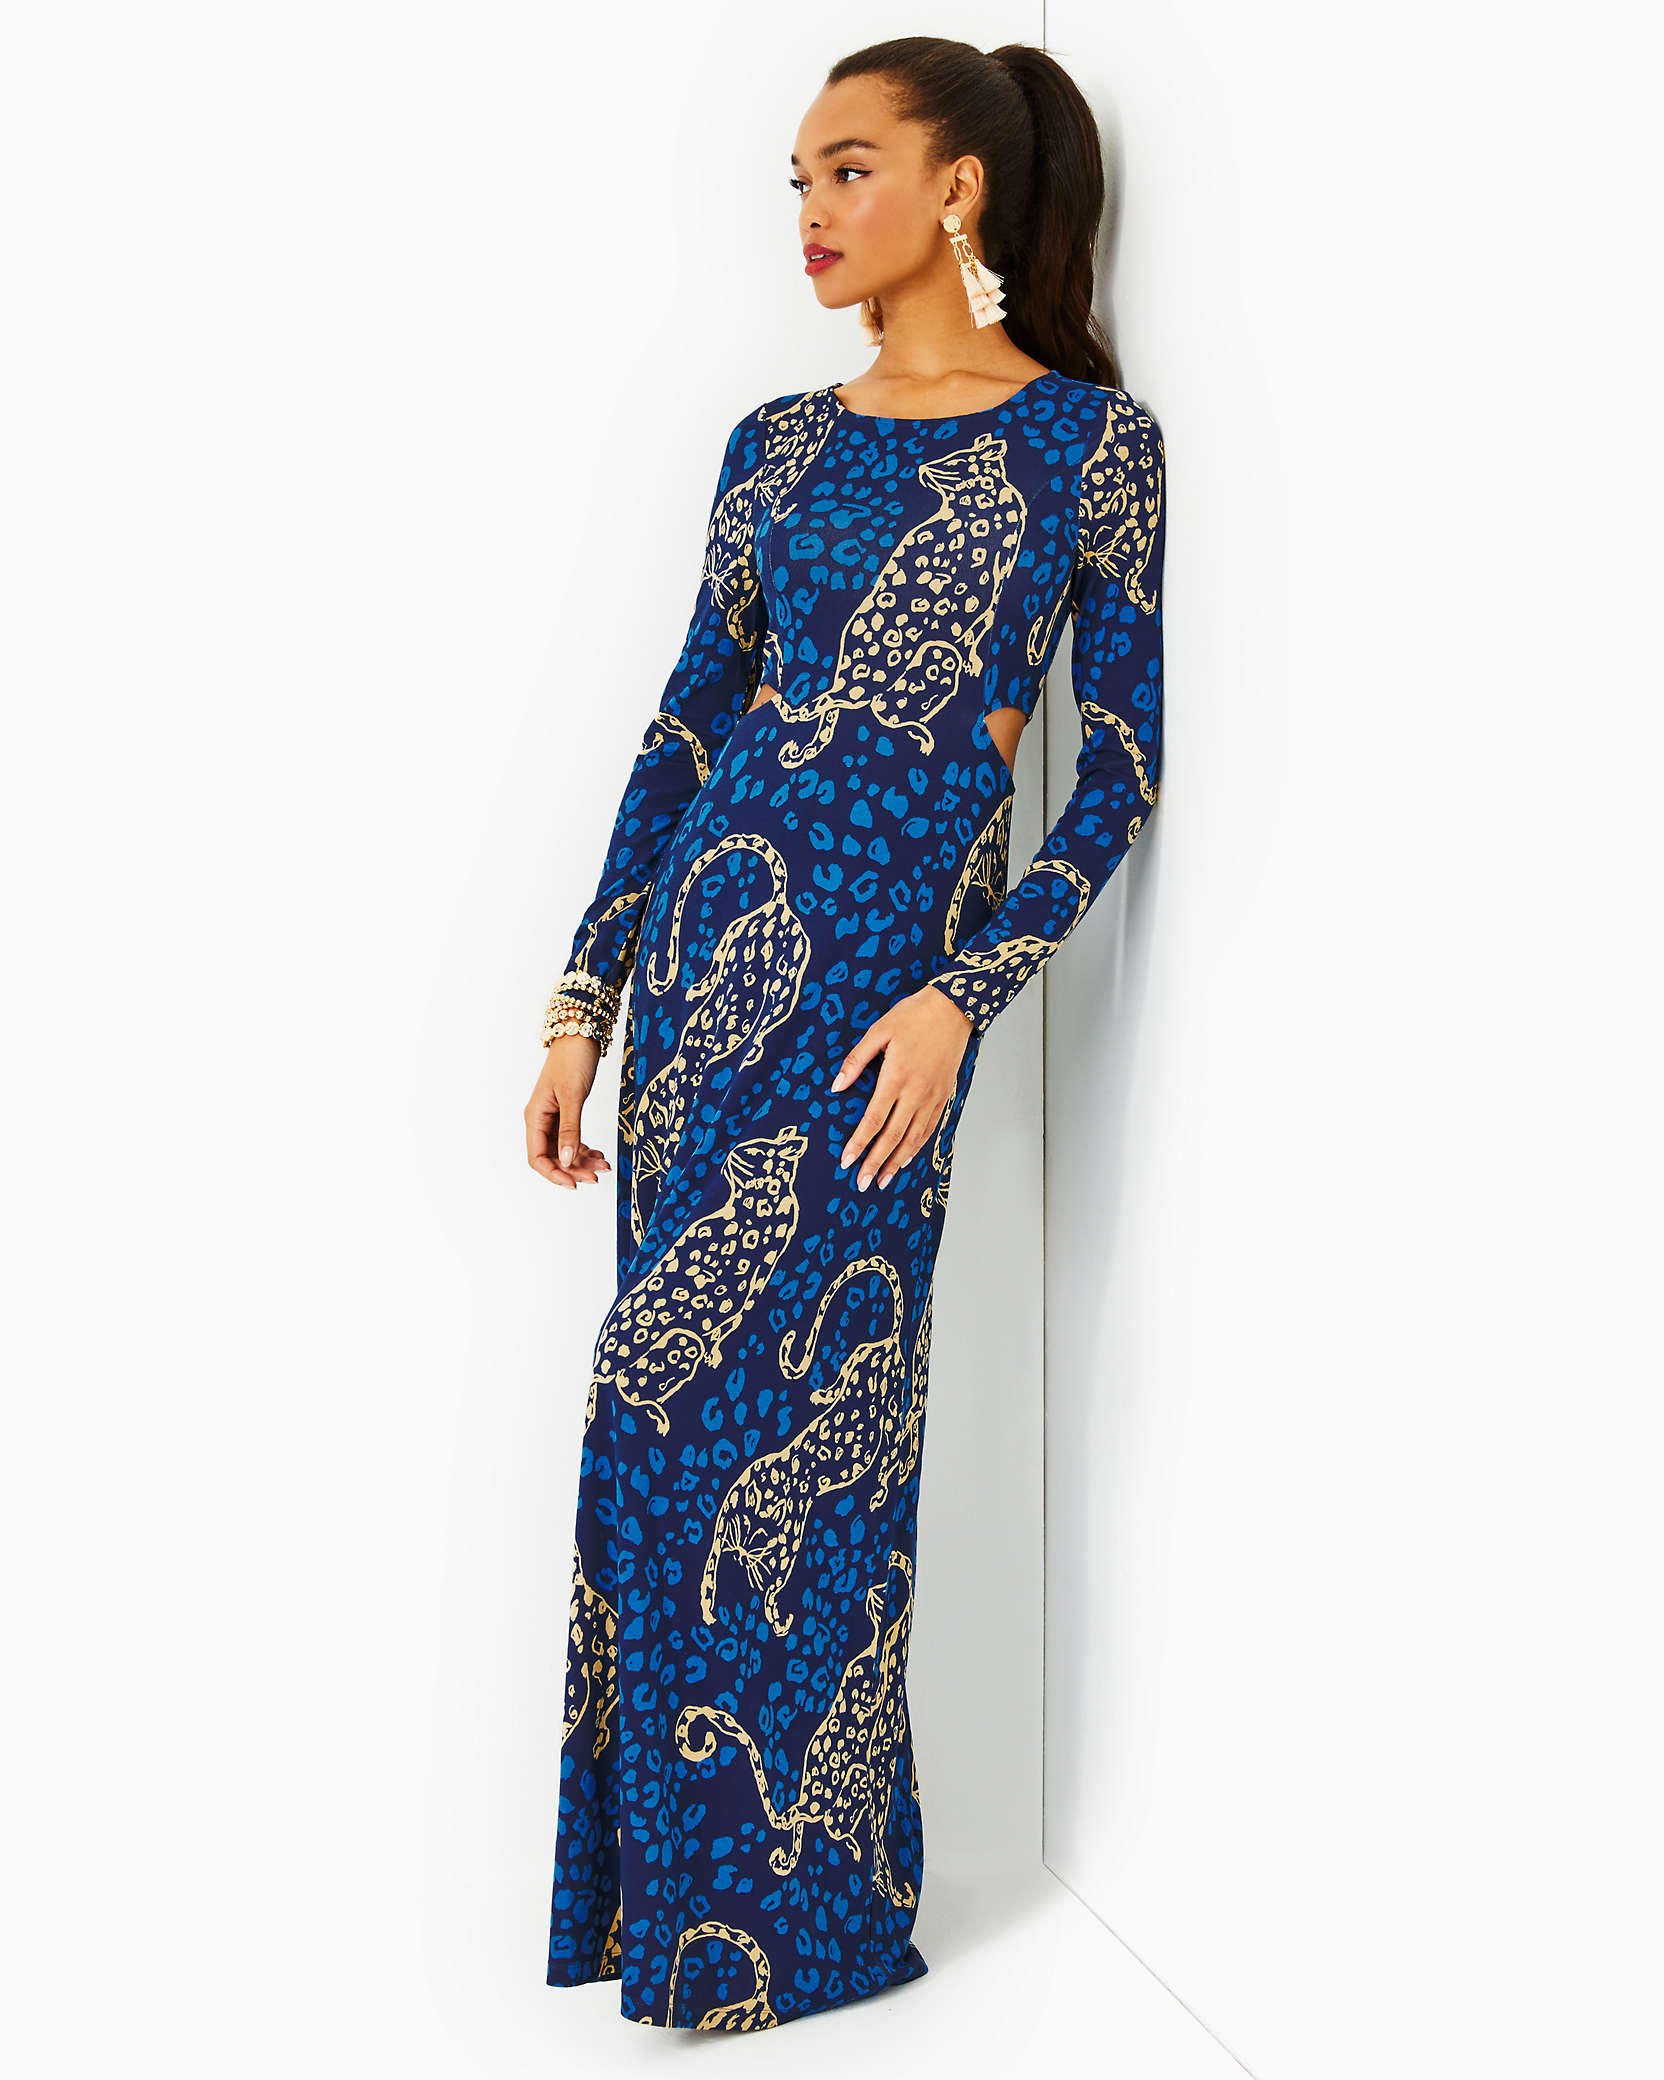 LILLY PULITZER STIRLING MAXI DRESS